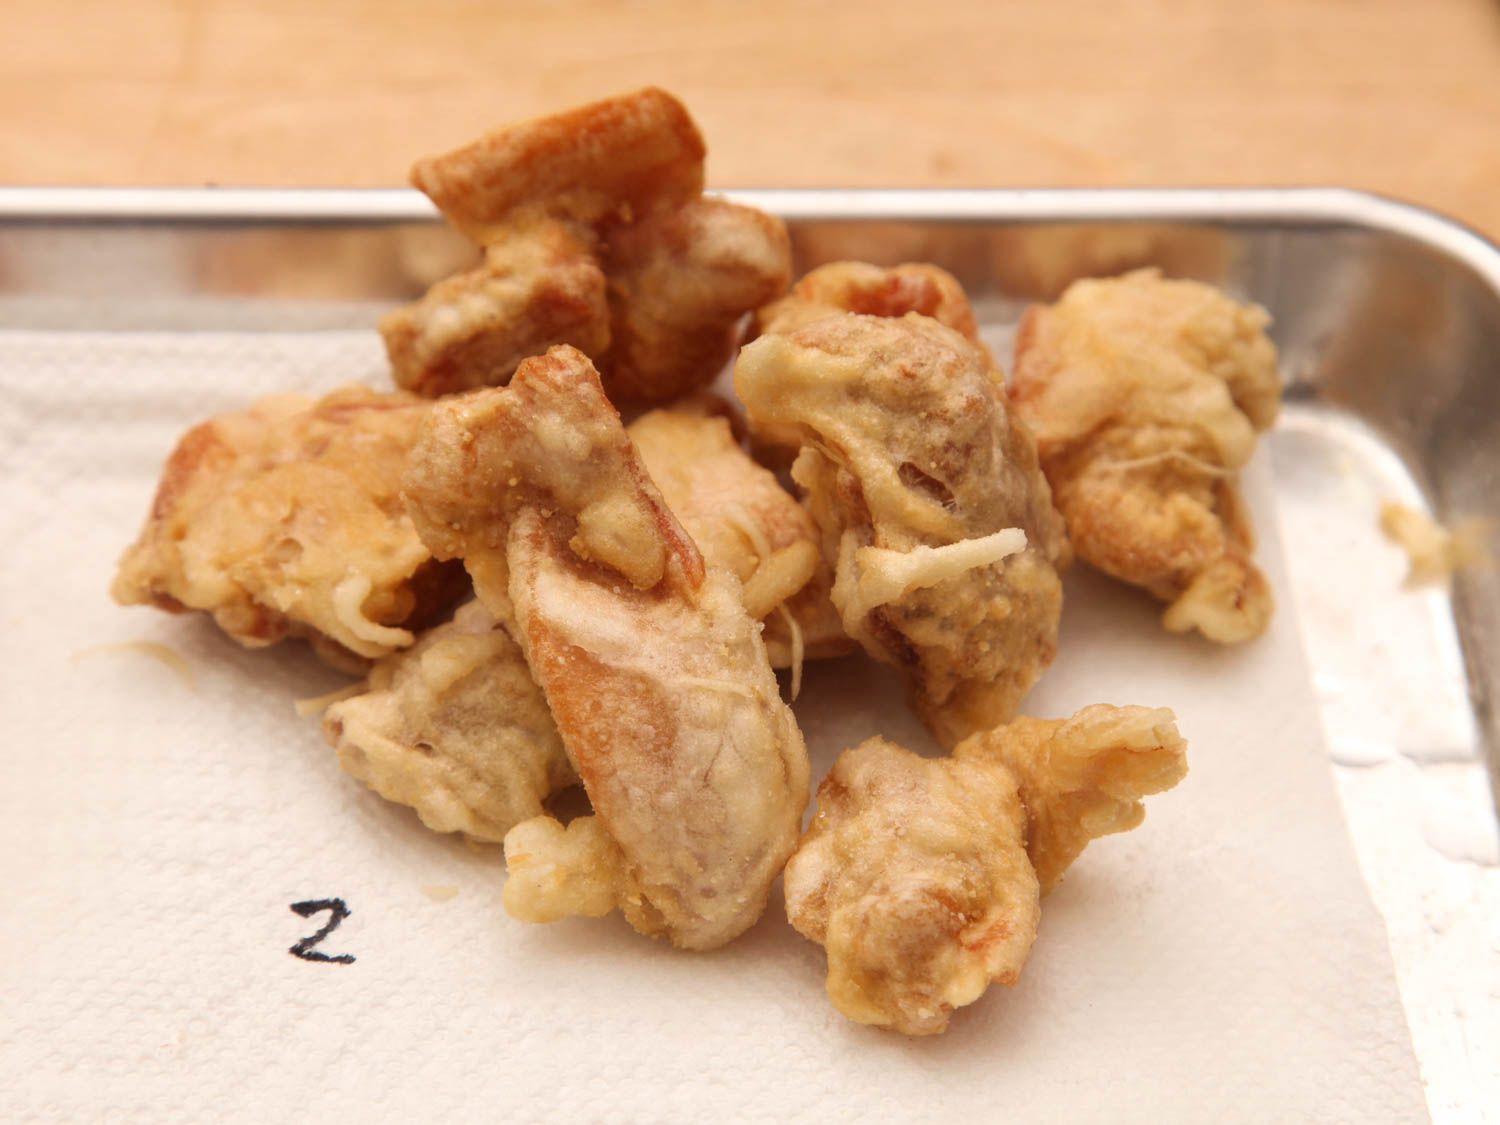 Boneless chicken thighs coated in a Korean-style coating